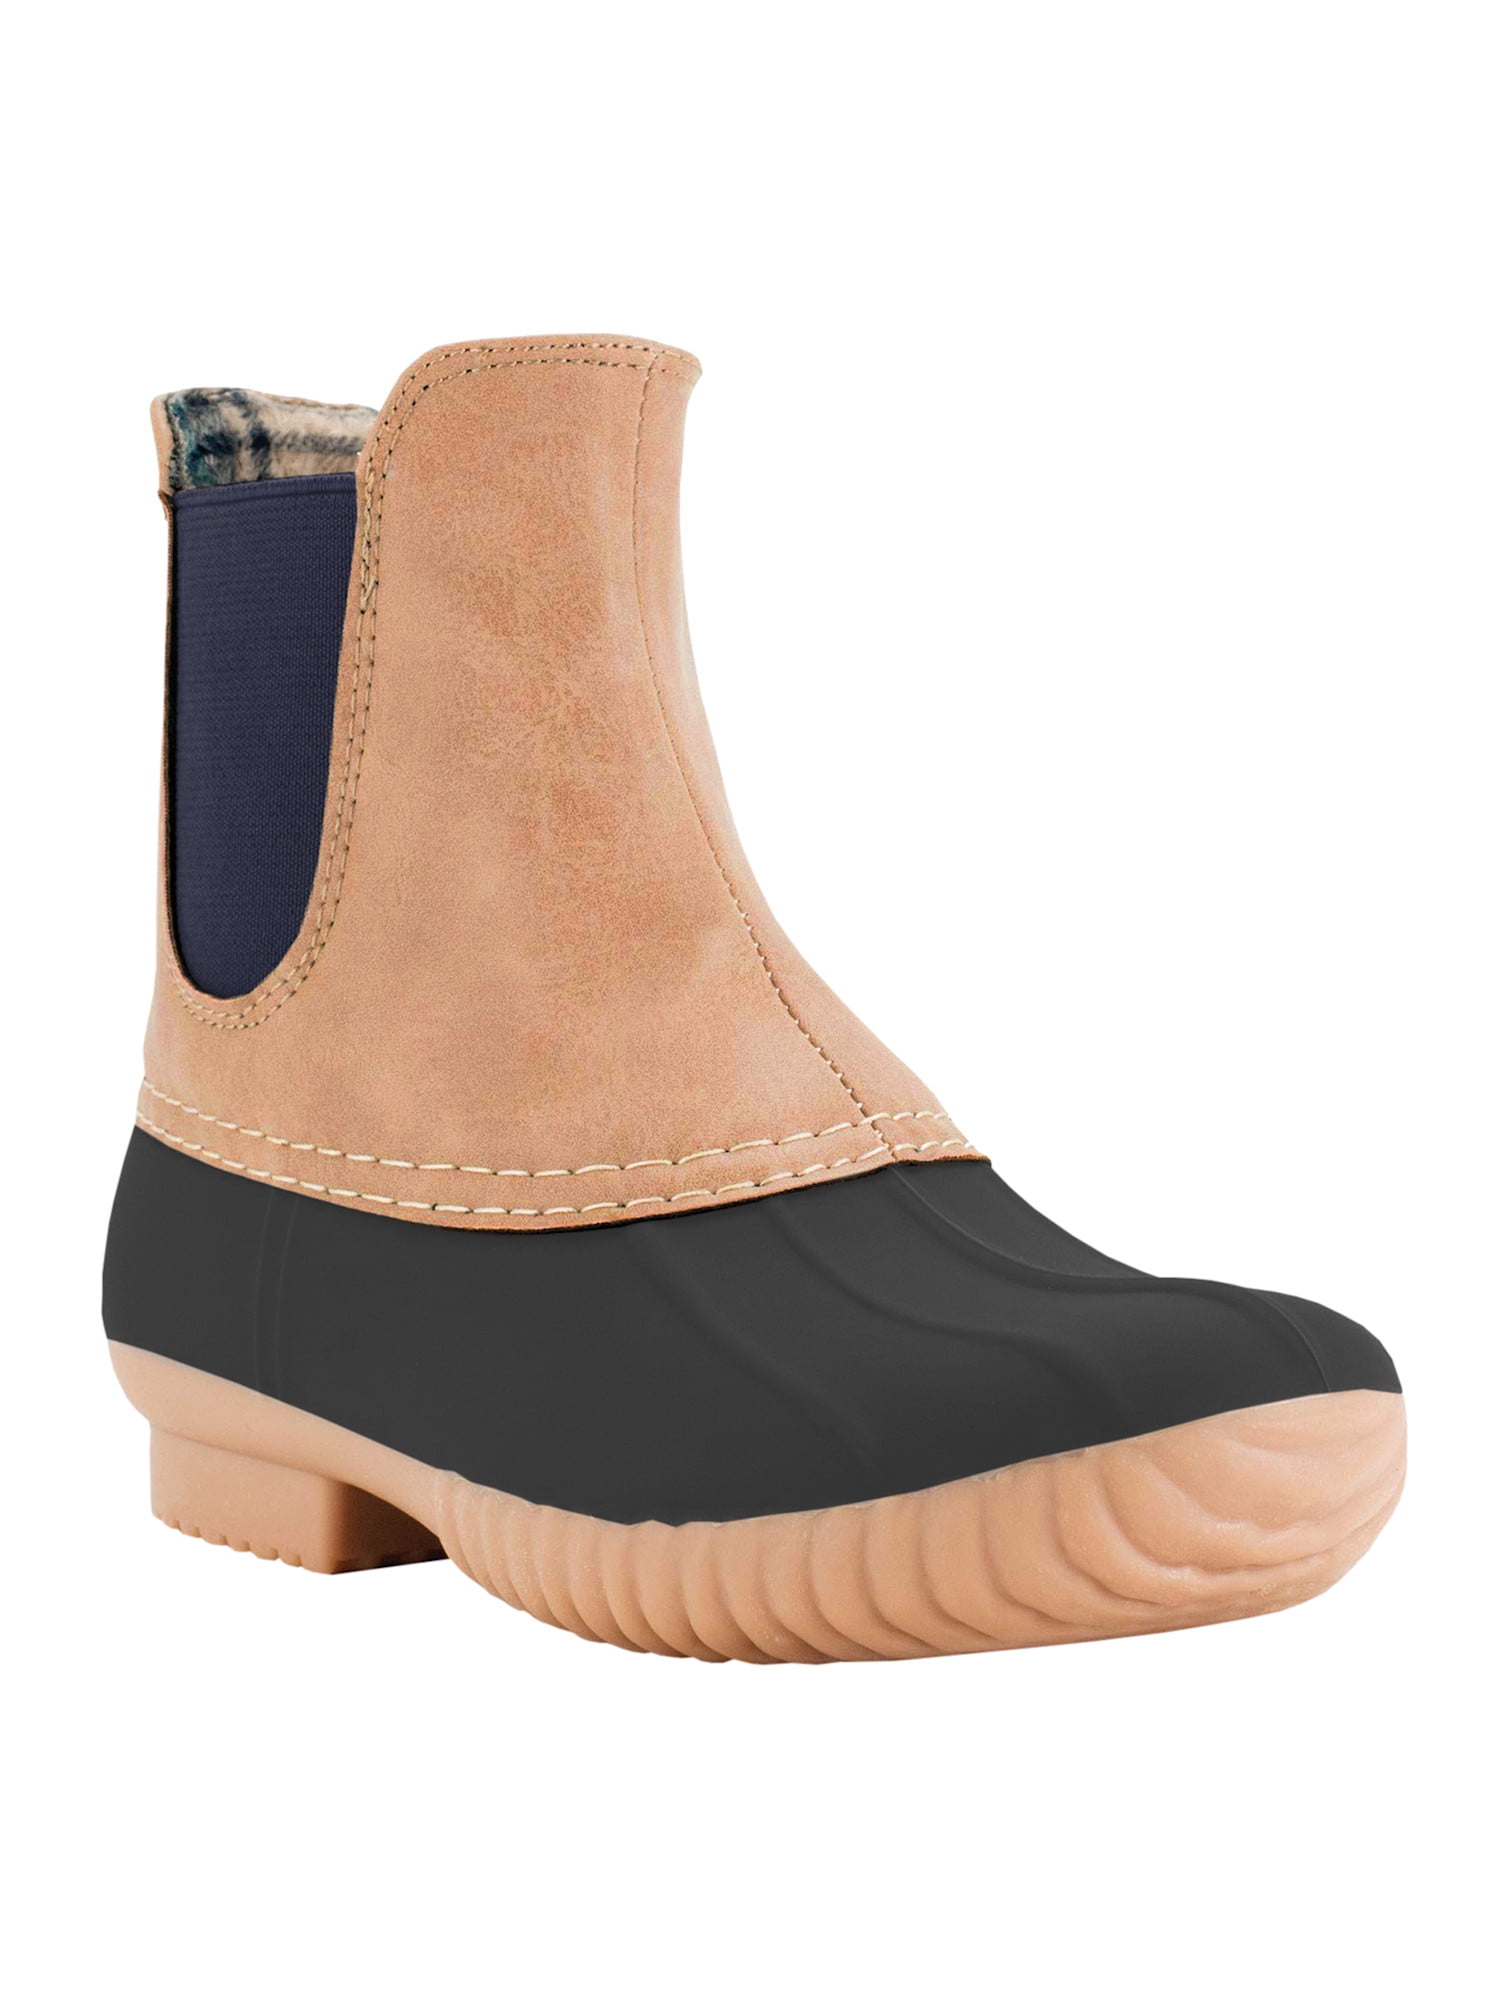 duck rain boots for adults